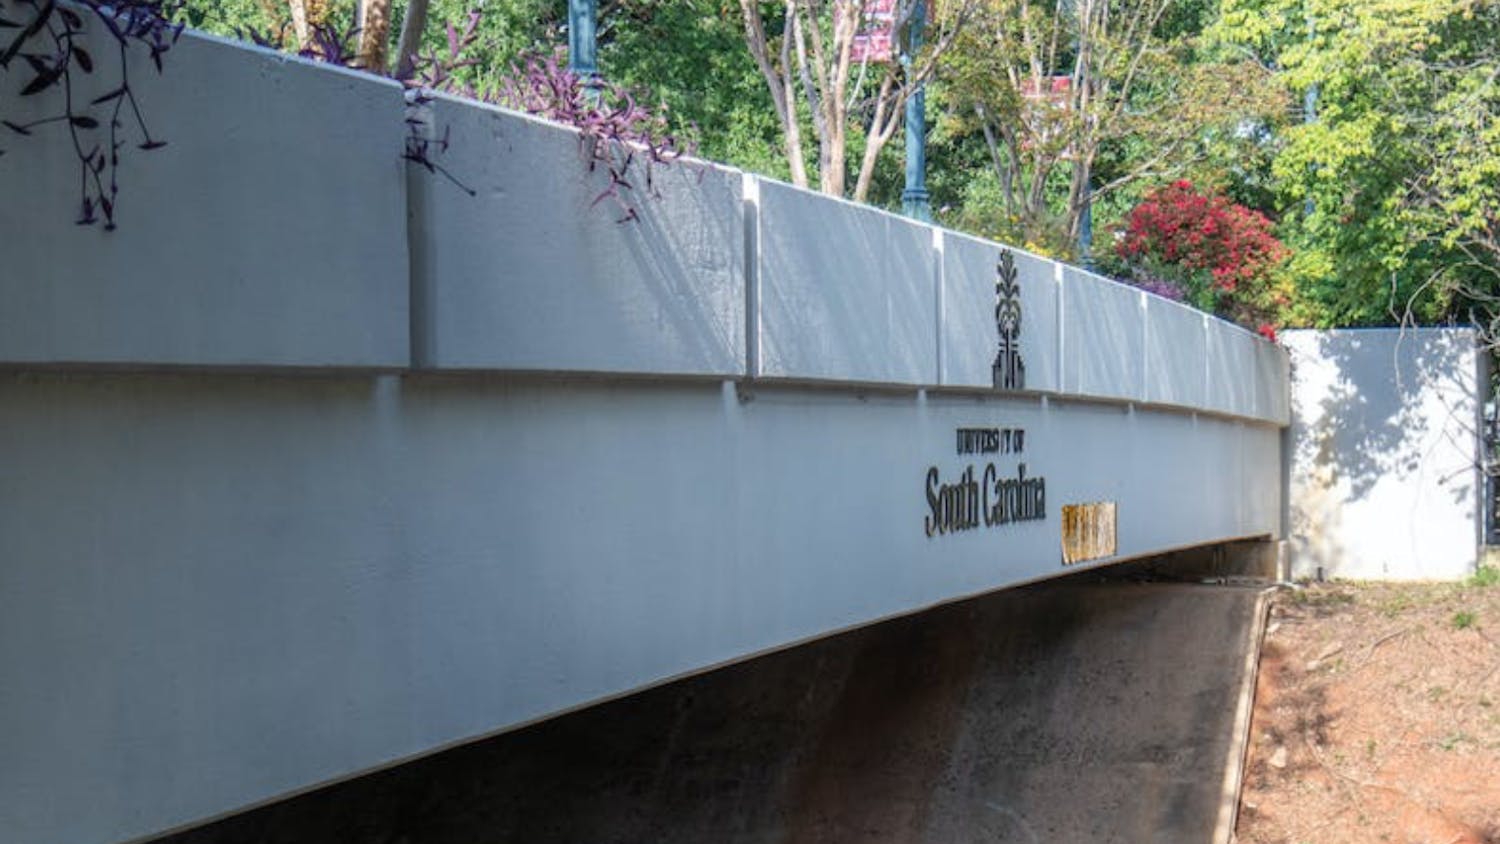 A side view of the Pickens Street Bridge. The bridge overlooks Pickens Street and connects the two parts of the UofSC campus.&nbsp;